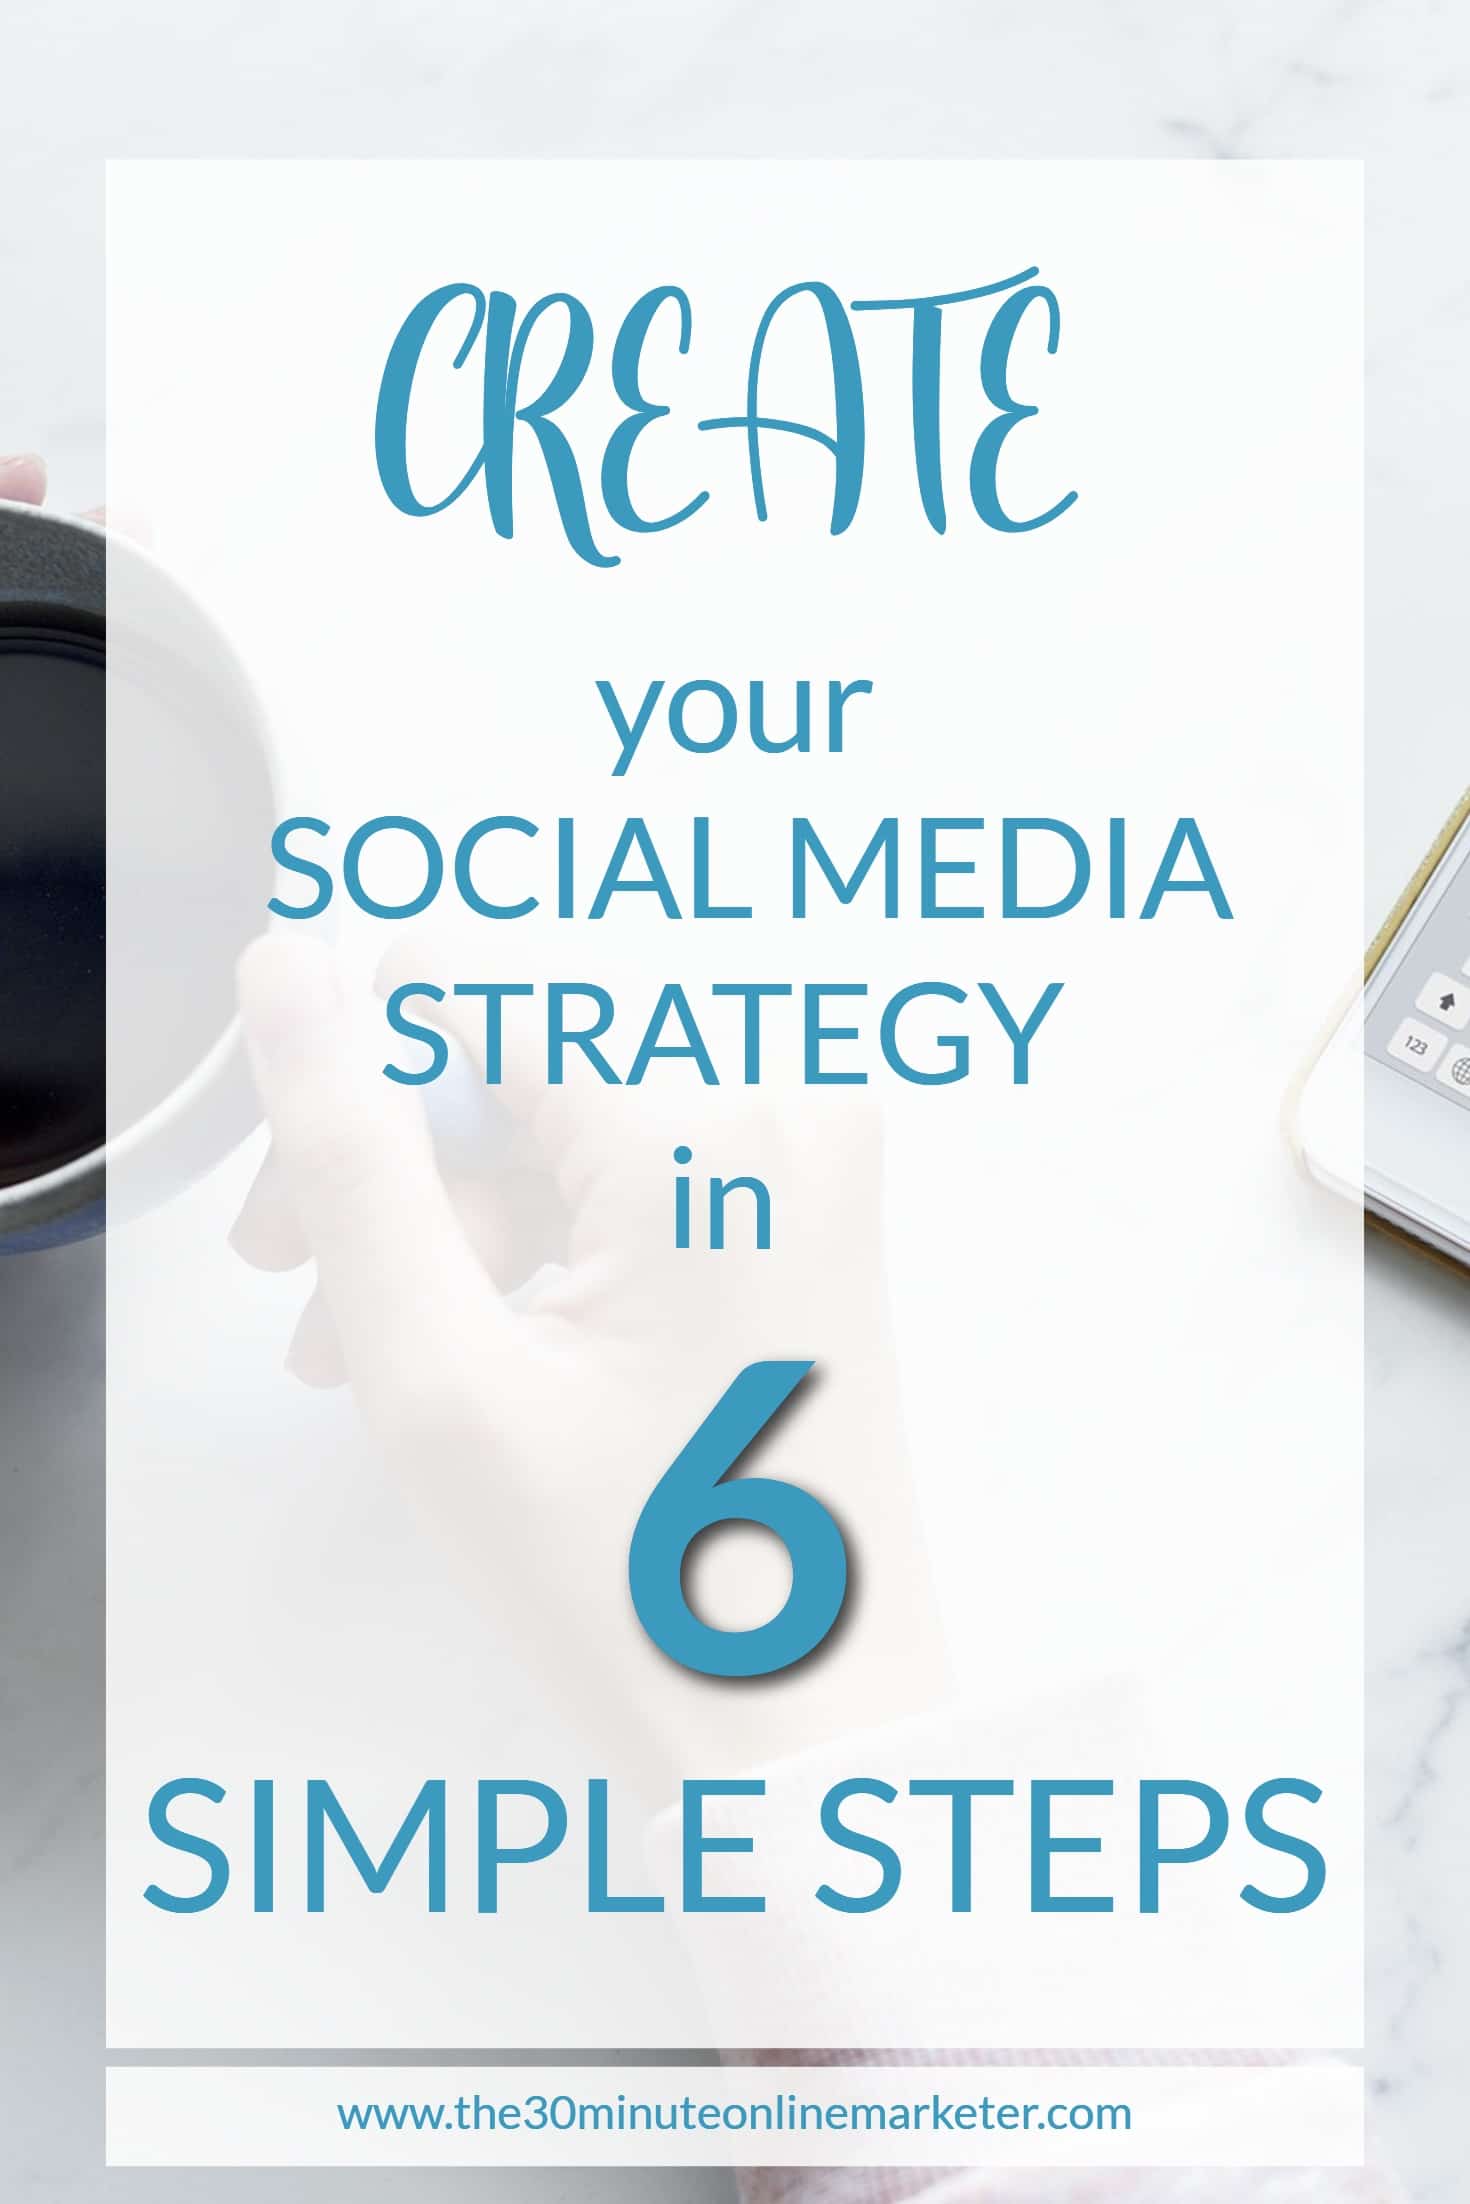 Create your social media strategy in 6 simple steps